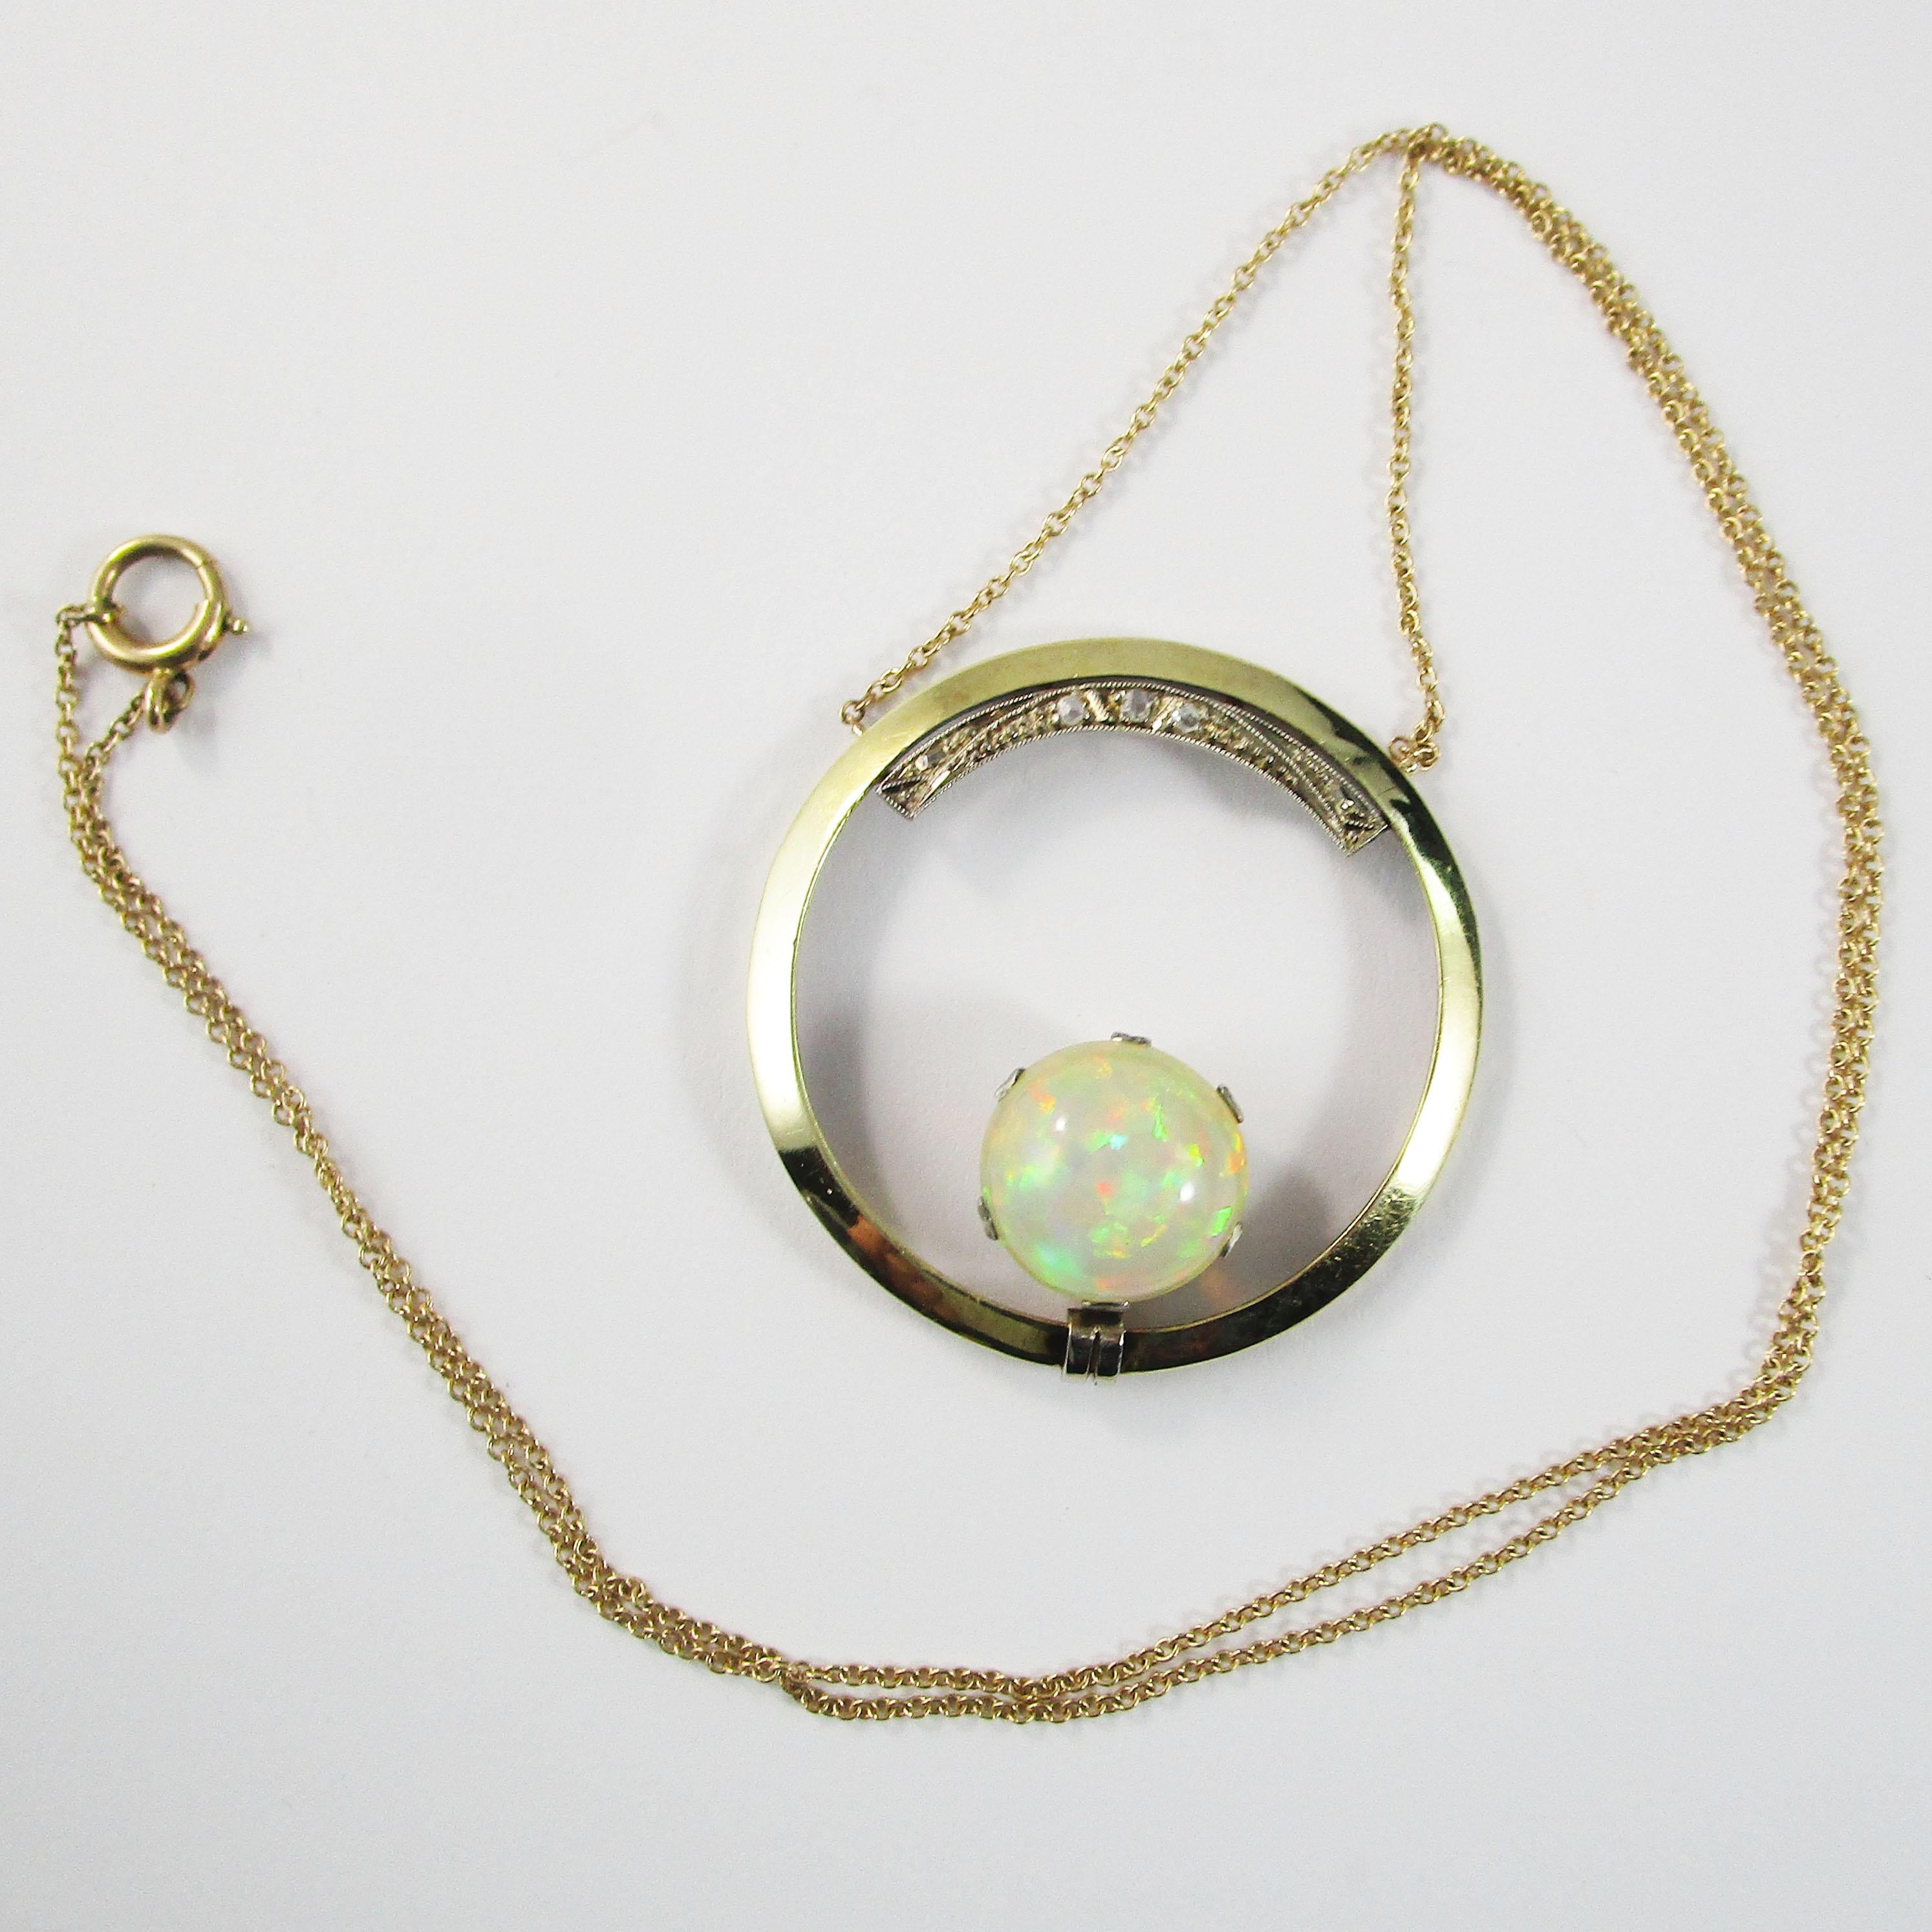 This is a stunning Art Deco necklace in 14k yellow gold with an open circle design accented by diamonds and a breathtaking opal center! The center of the necklace is an open circle in 14k yellow gold. The top of the circle is decorated with delicate